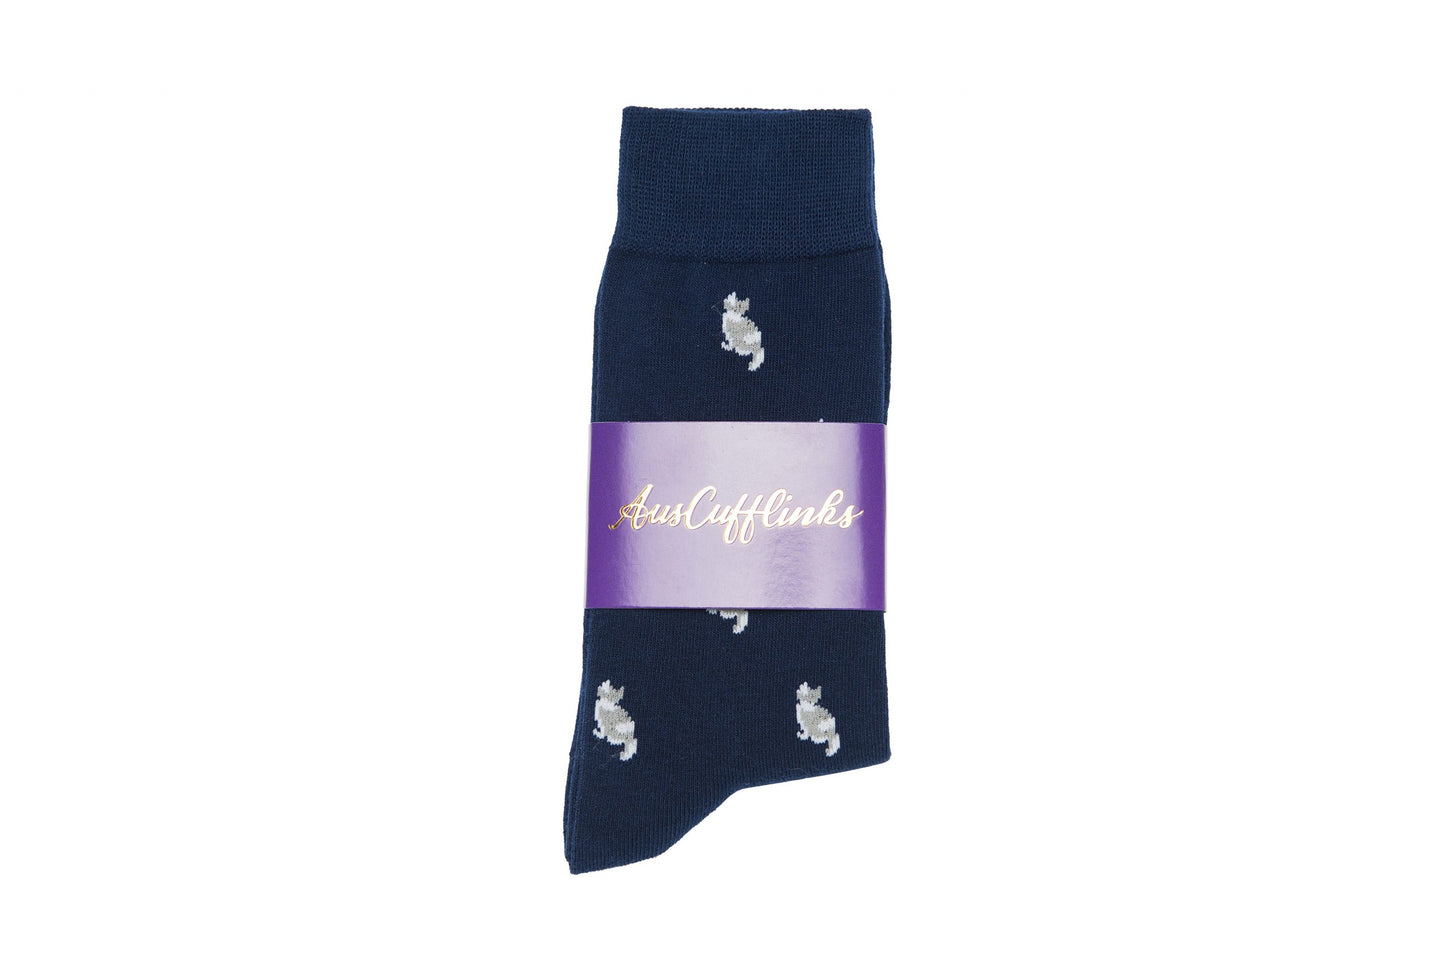 A blue Cat Sock with white rabbit designs on it.